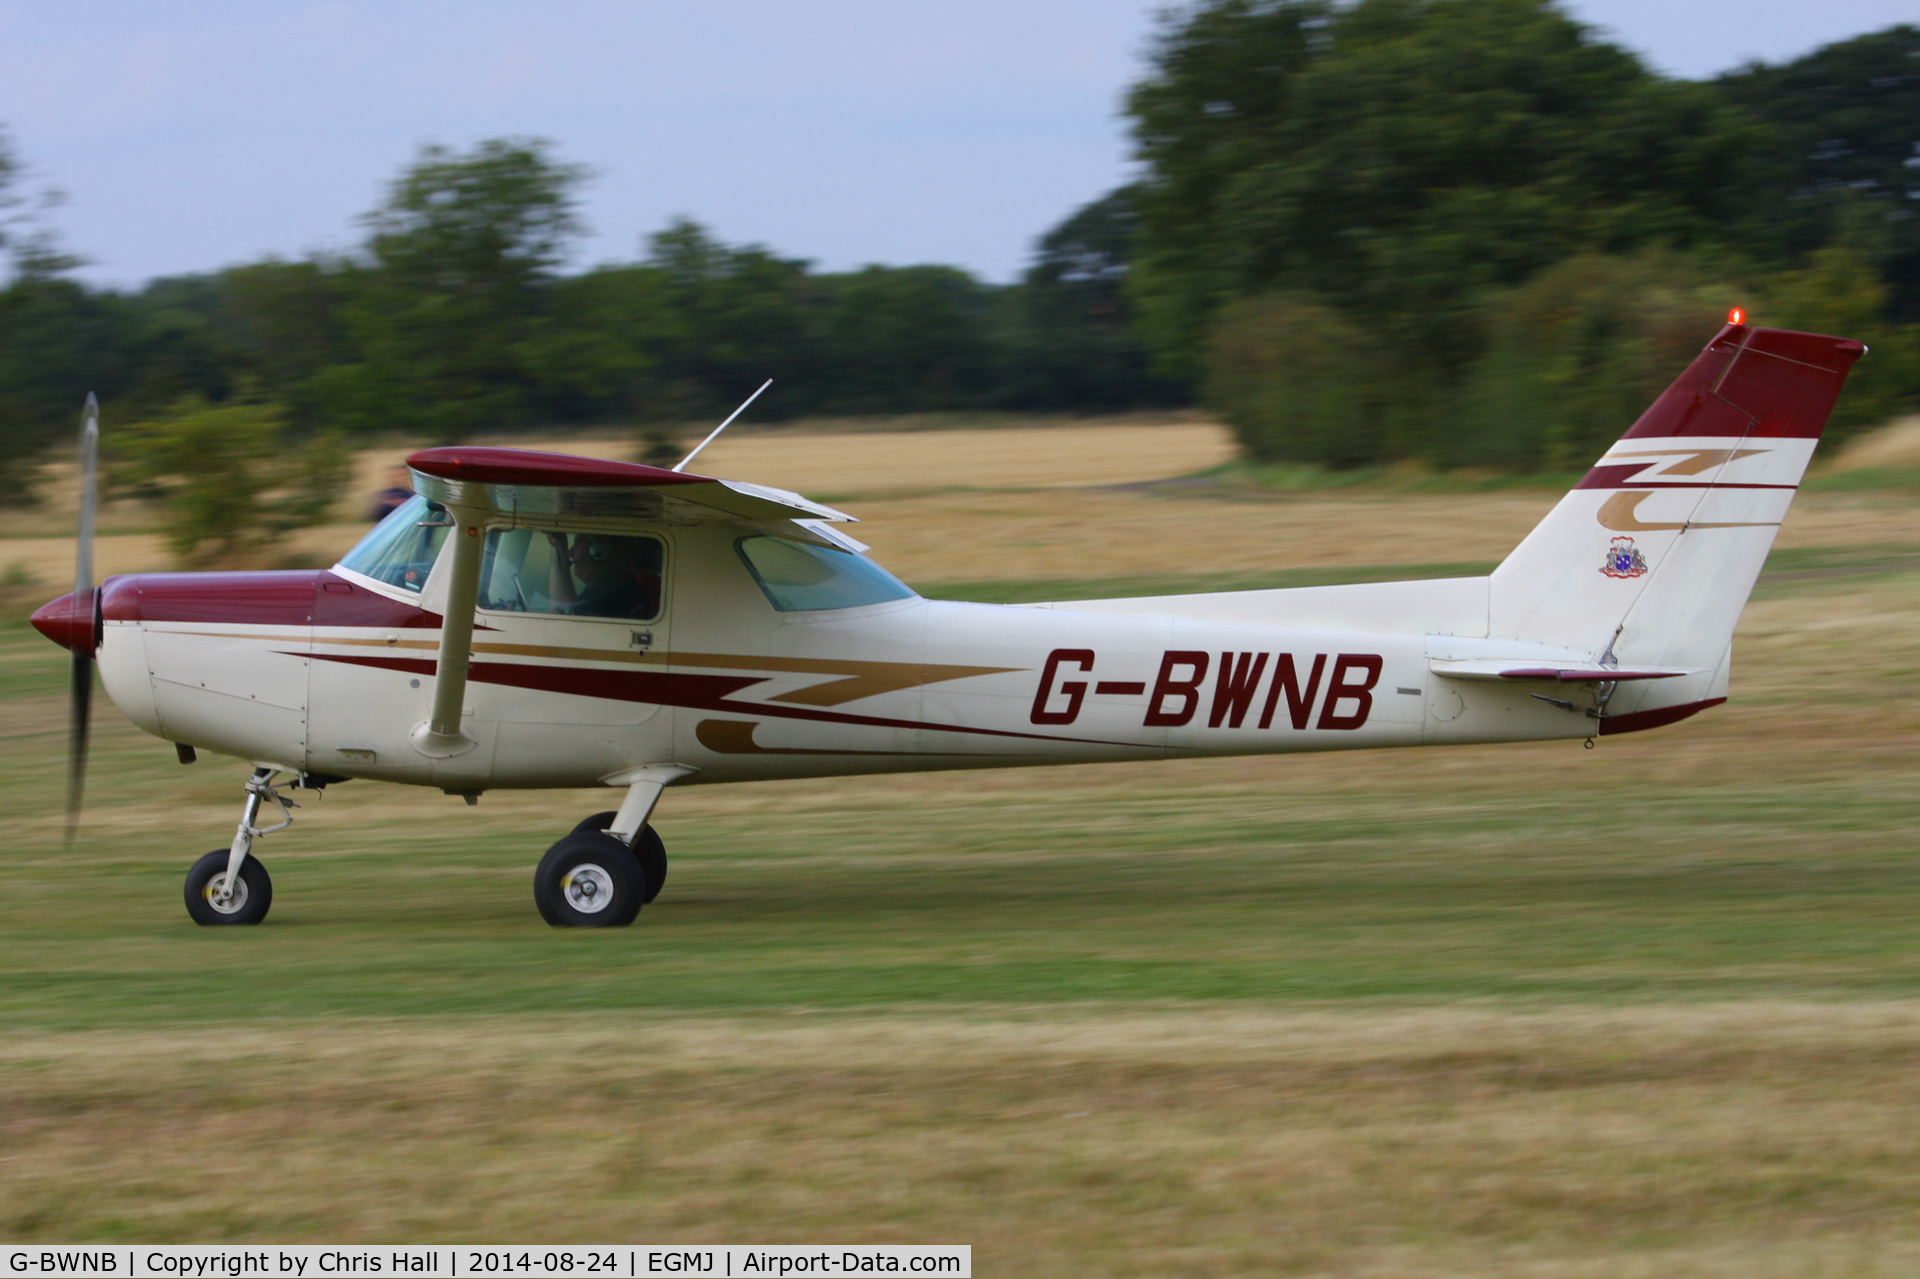 G-BWNB, 1978 Cessna 152 C/N 152-80051, at the Little Gransden Airshow 2014